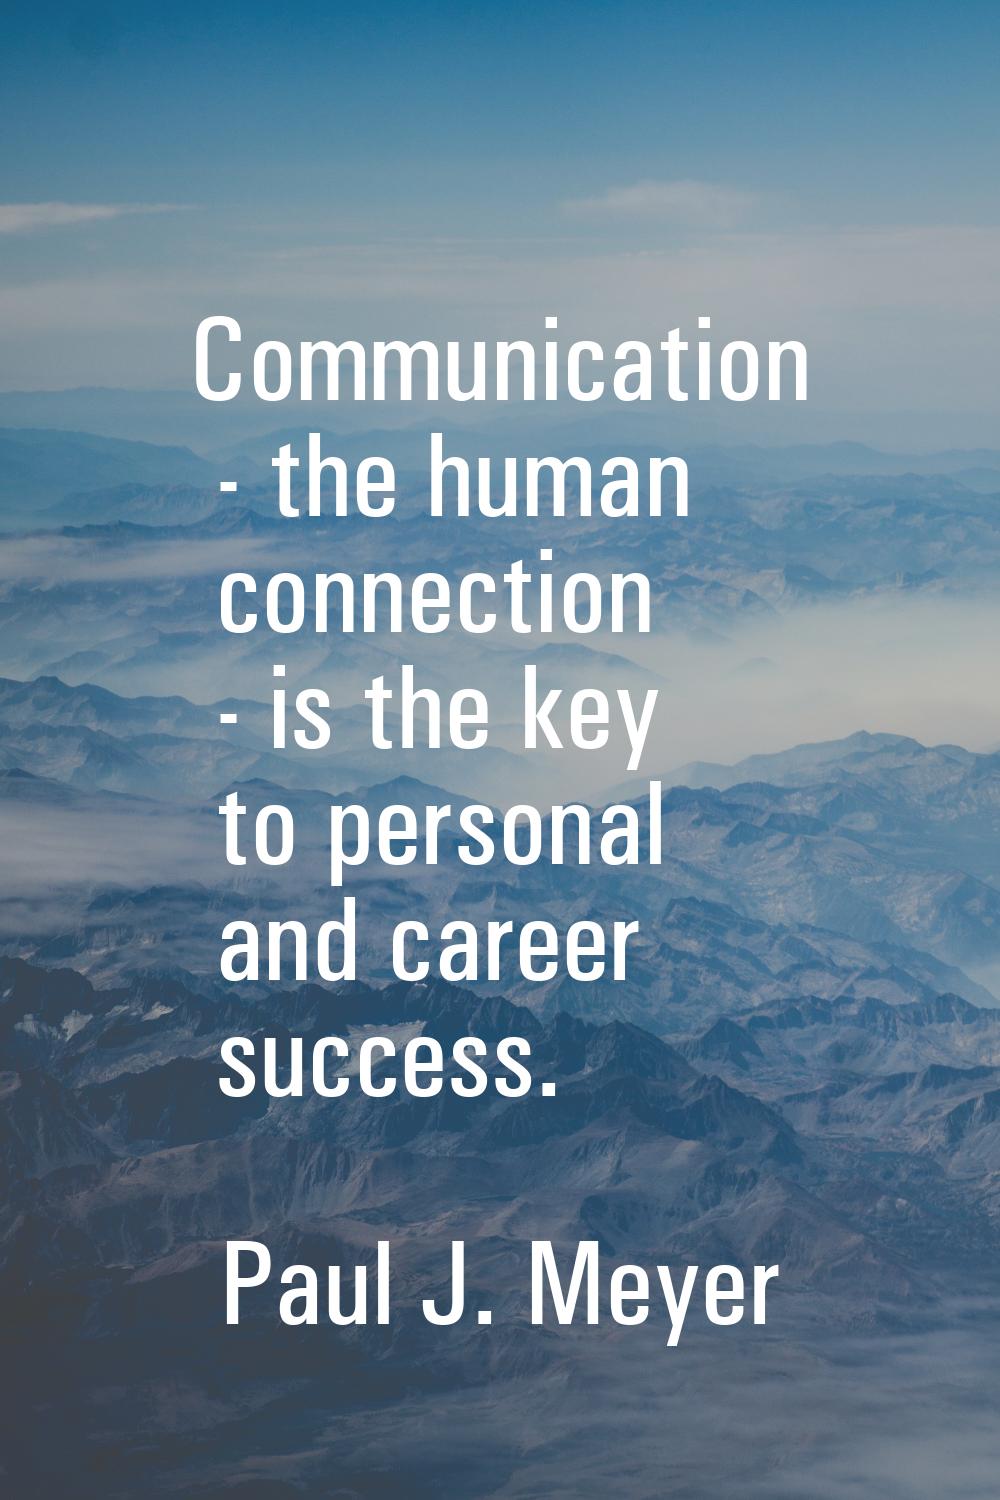 Communication - the human connection - is the key to personal and career success.